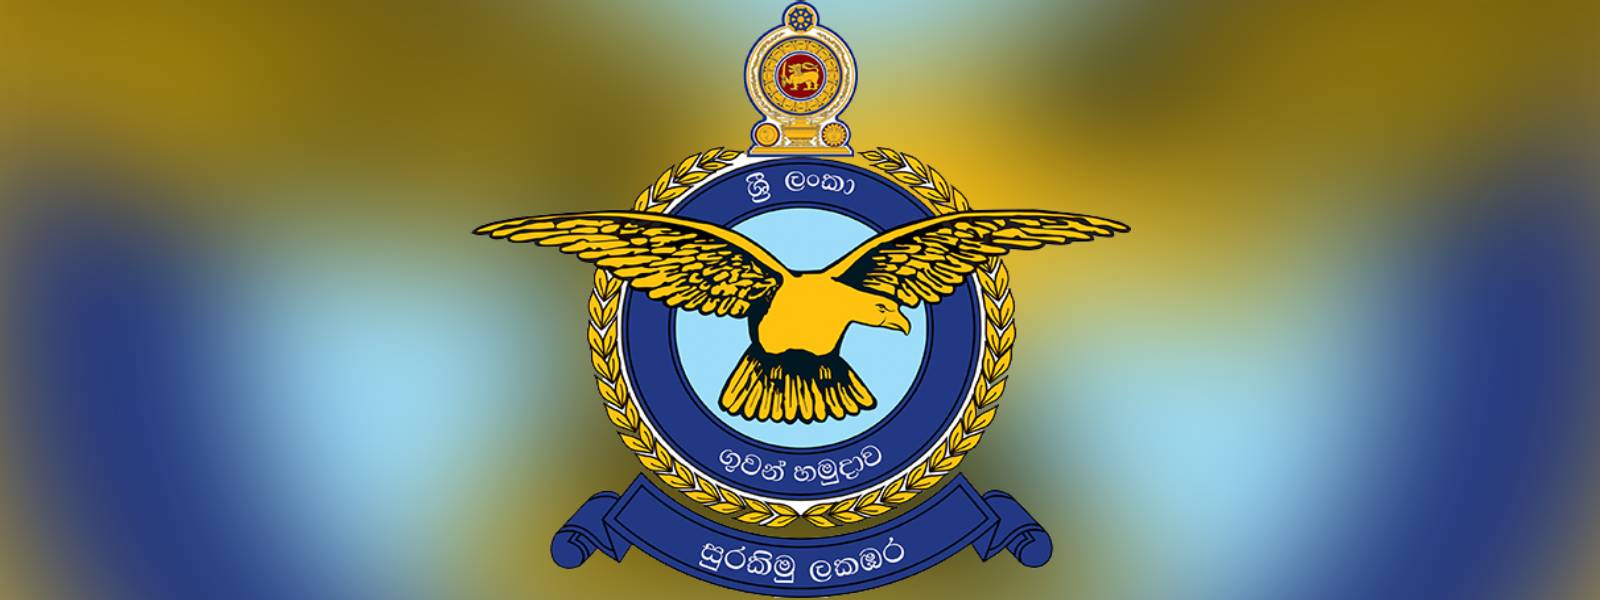 Sri Lanka Air Force promotes over 100 officers & 2,000 ranks on Independence Day